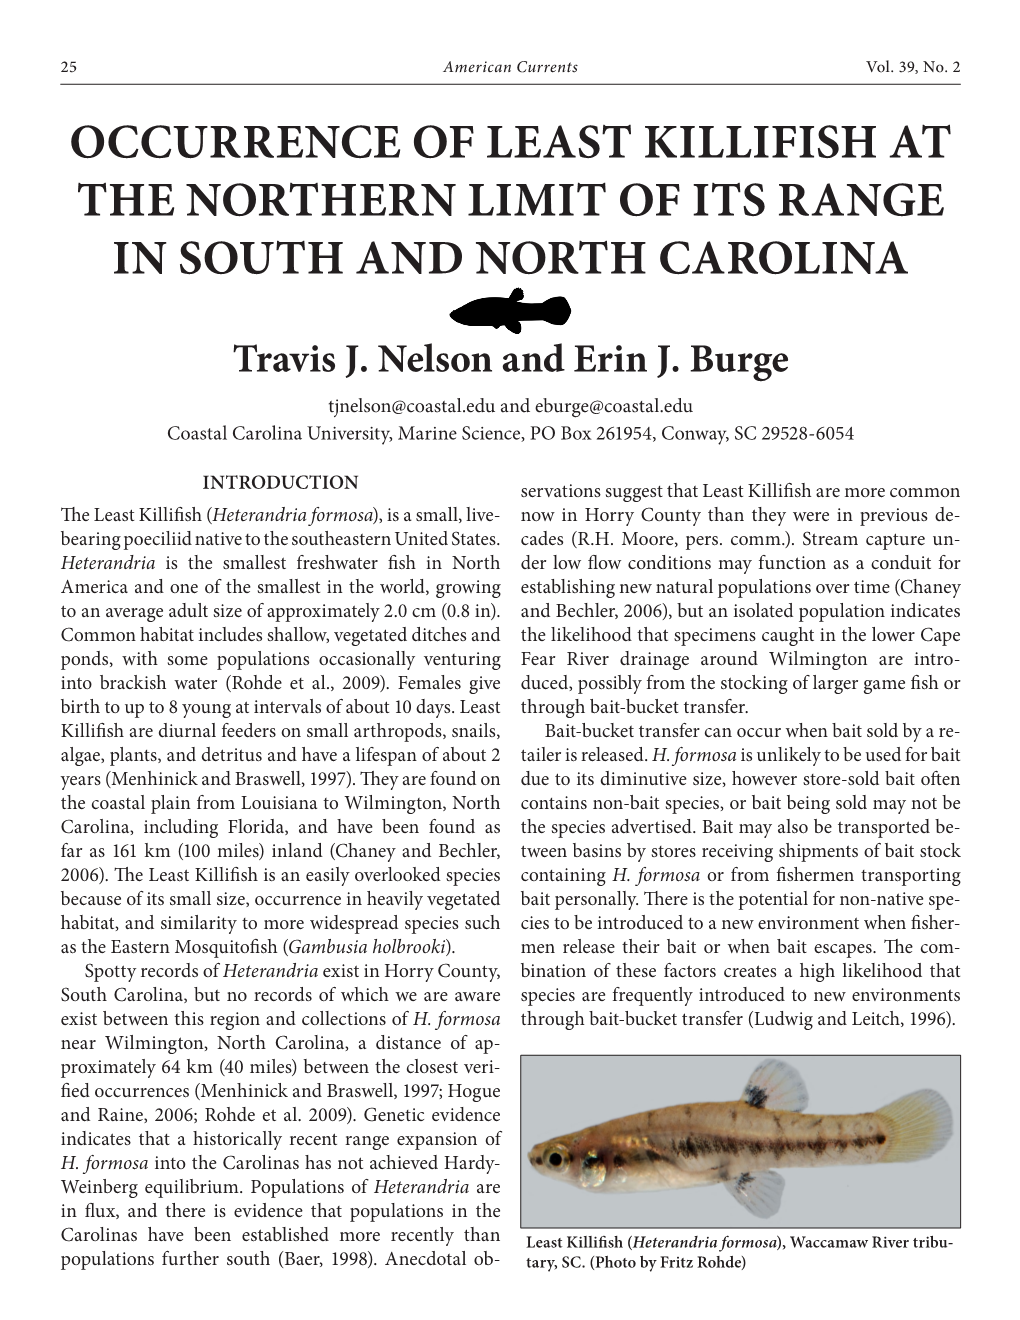 Occurrence of Least Killifish at the Northern Limit of Its Range in South and North Carolina